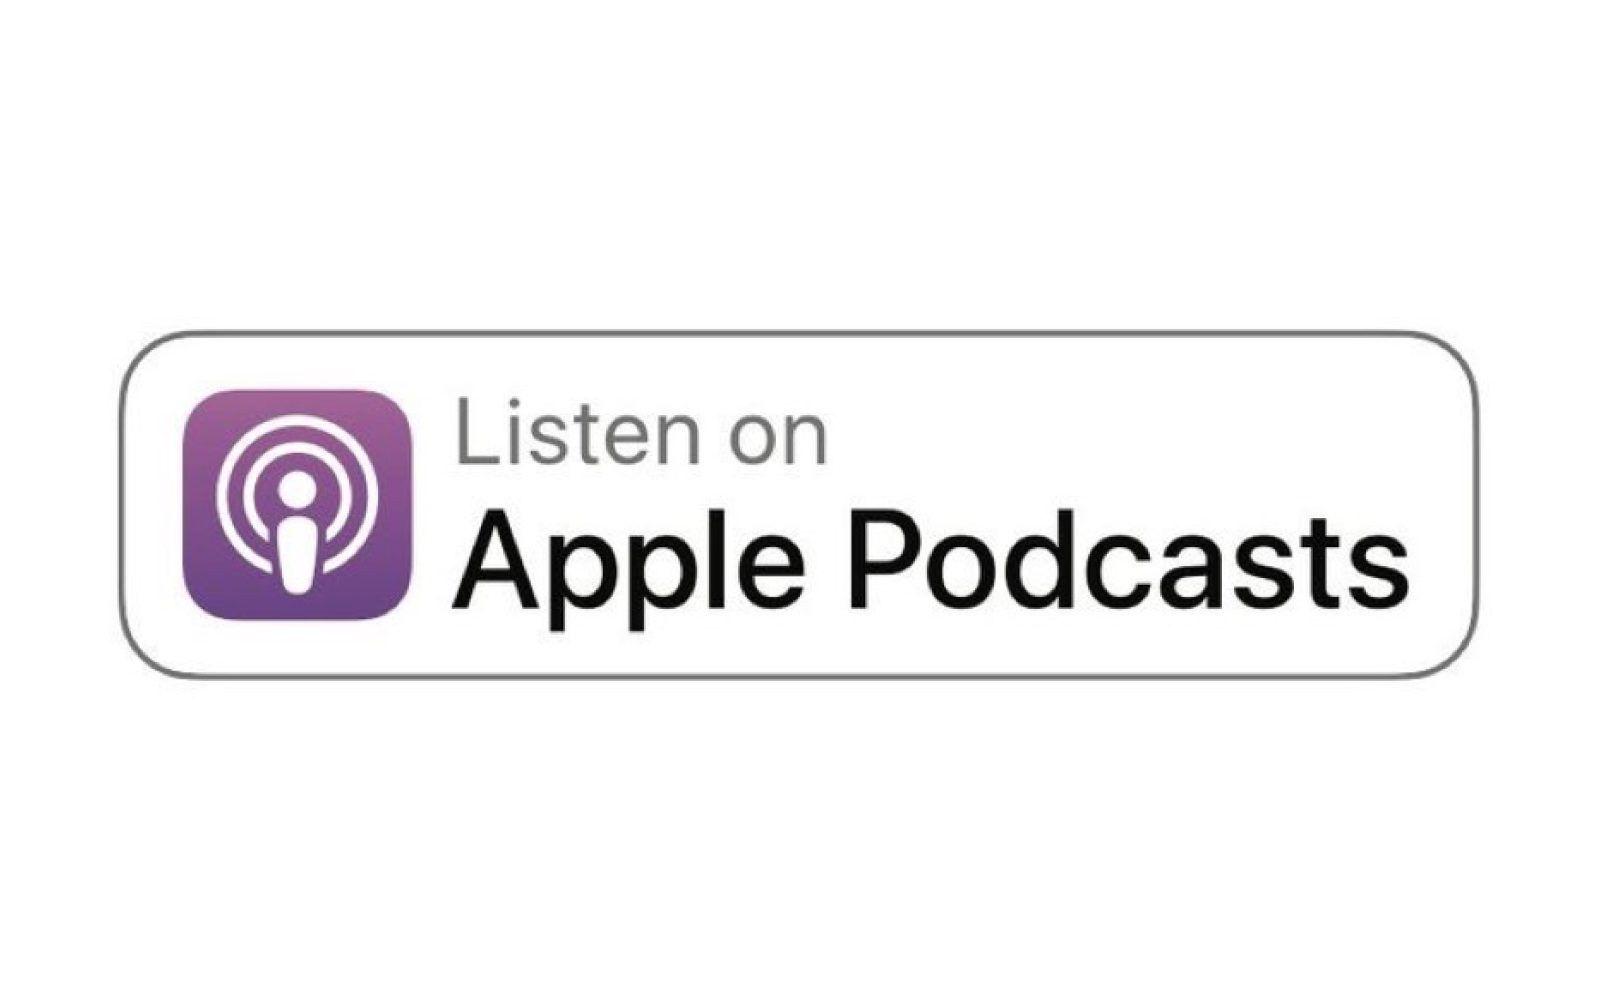 New iTunes Logo - Apple rebrands iTunes Podcasts directory as Apple Podcasts, new